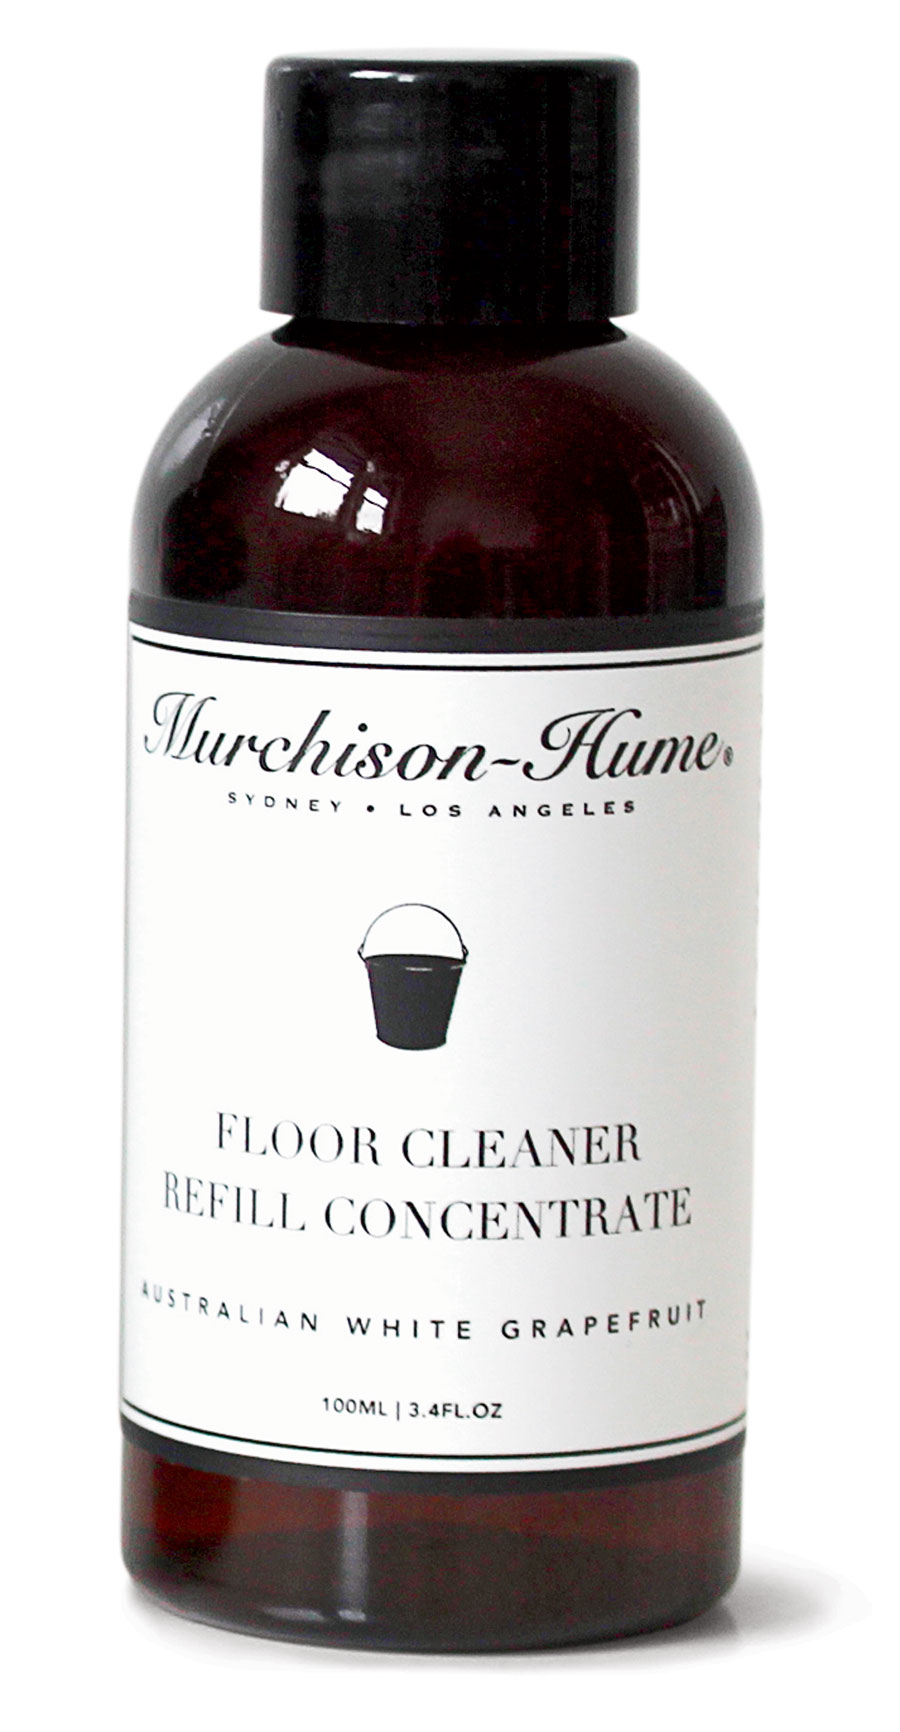 Murchison-Hume’s floor cleaner concentrate